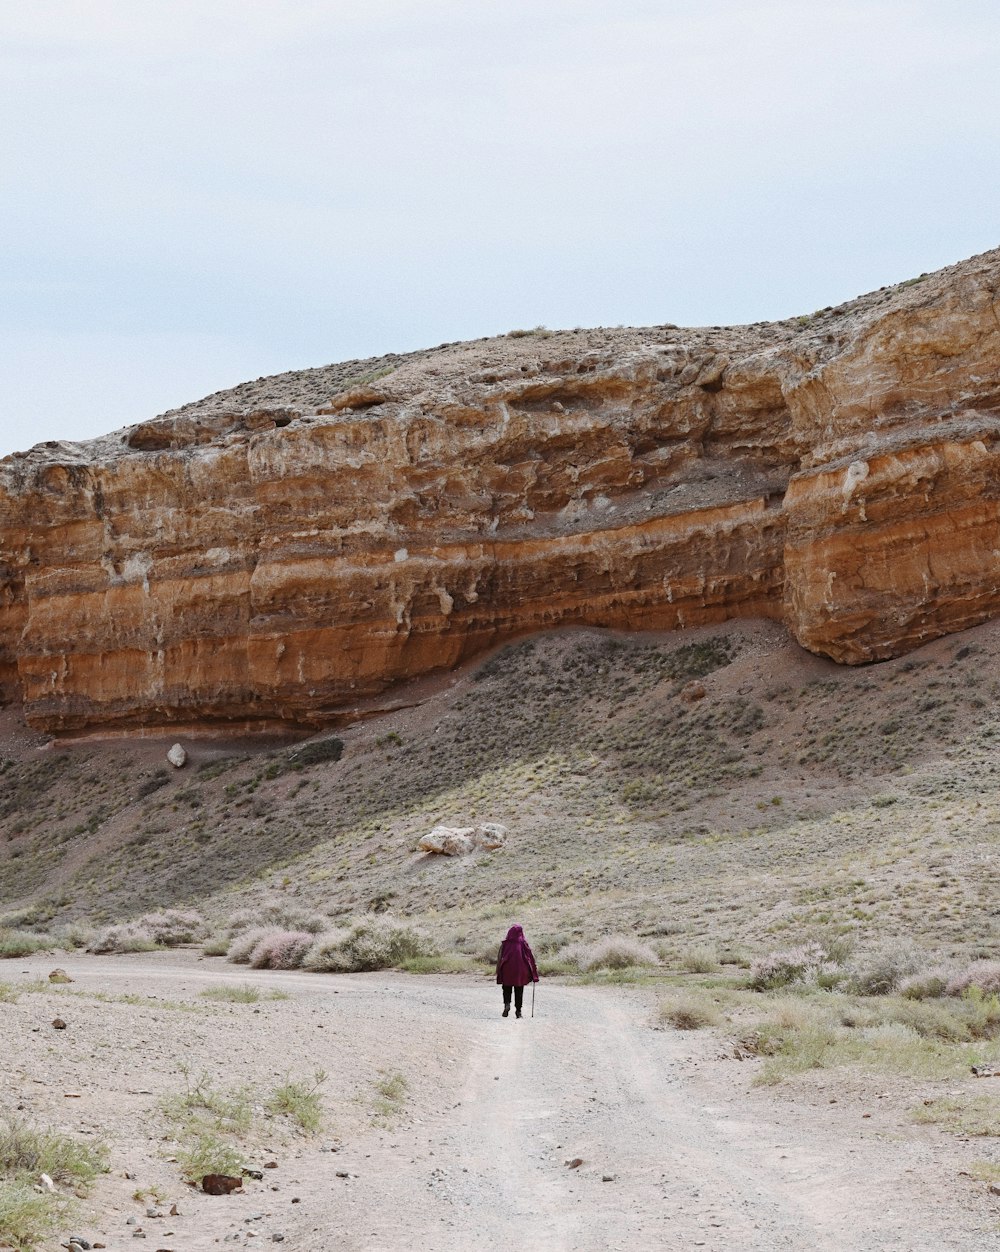 a person walking down a dirt road in the desert